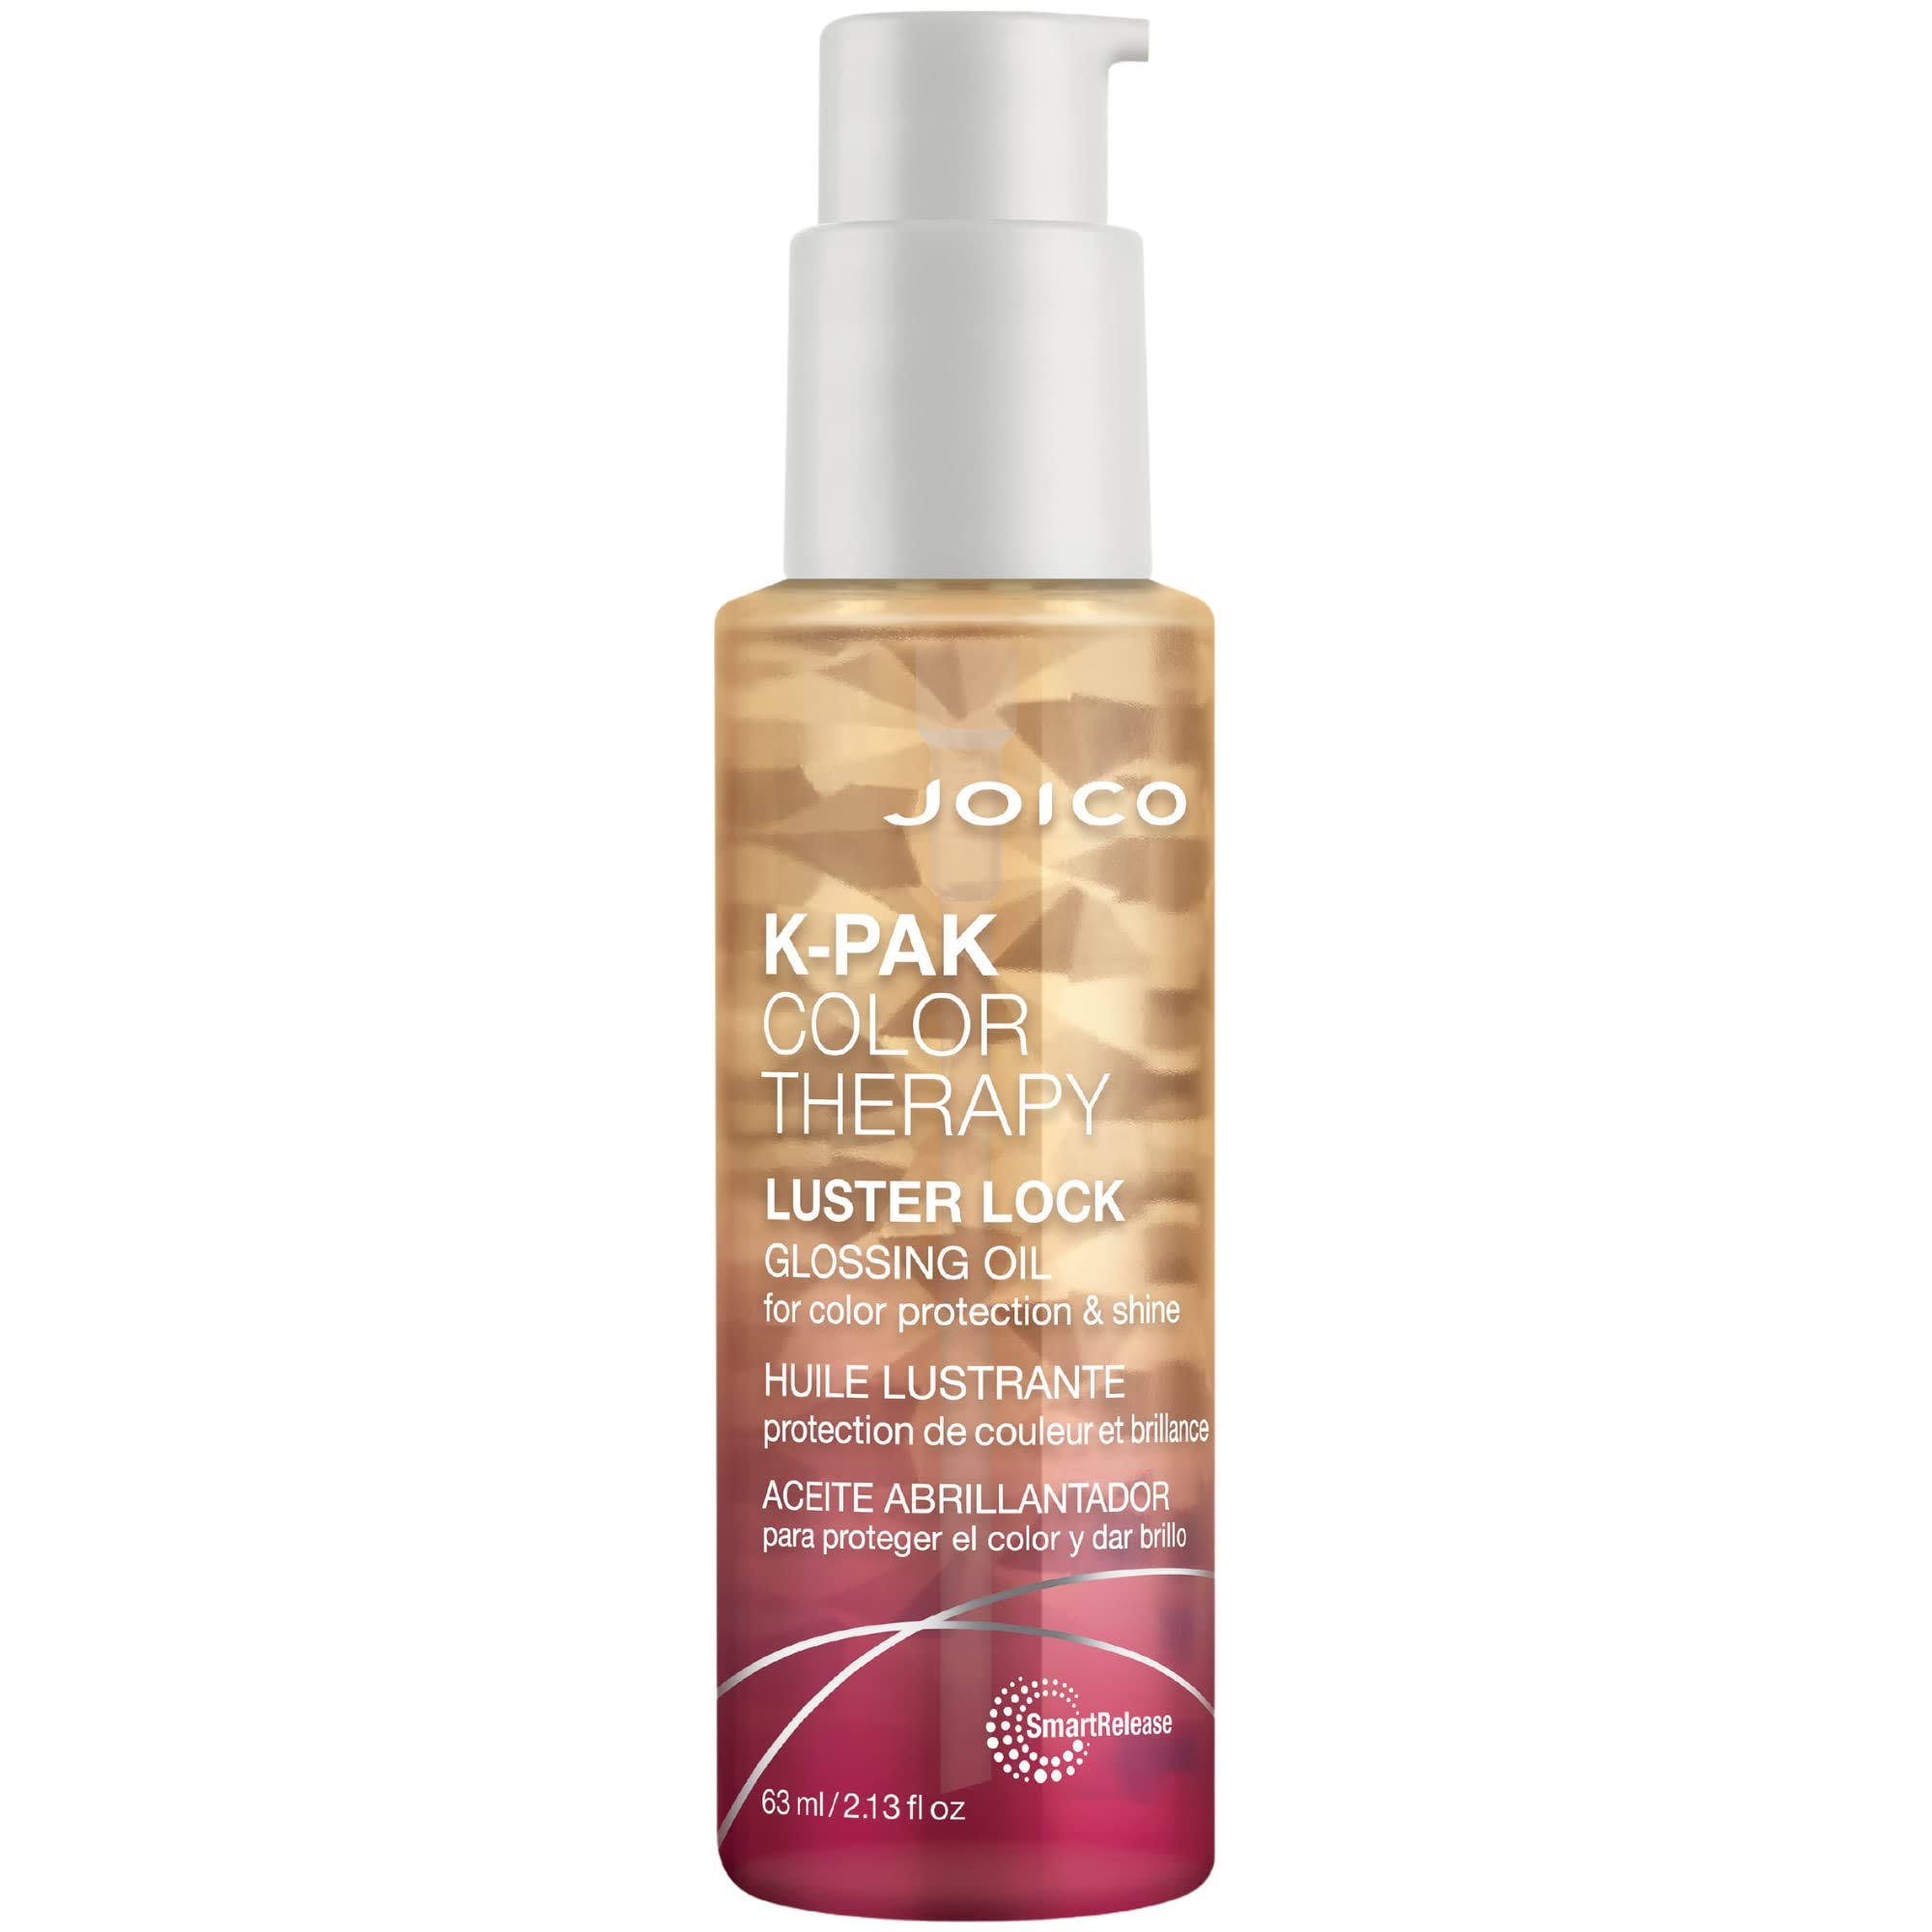 Joico K Pak Color Therapy Luster Lock Glossing Oil 63ml